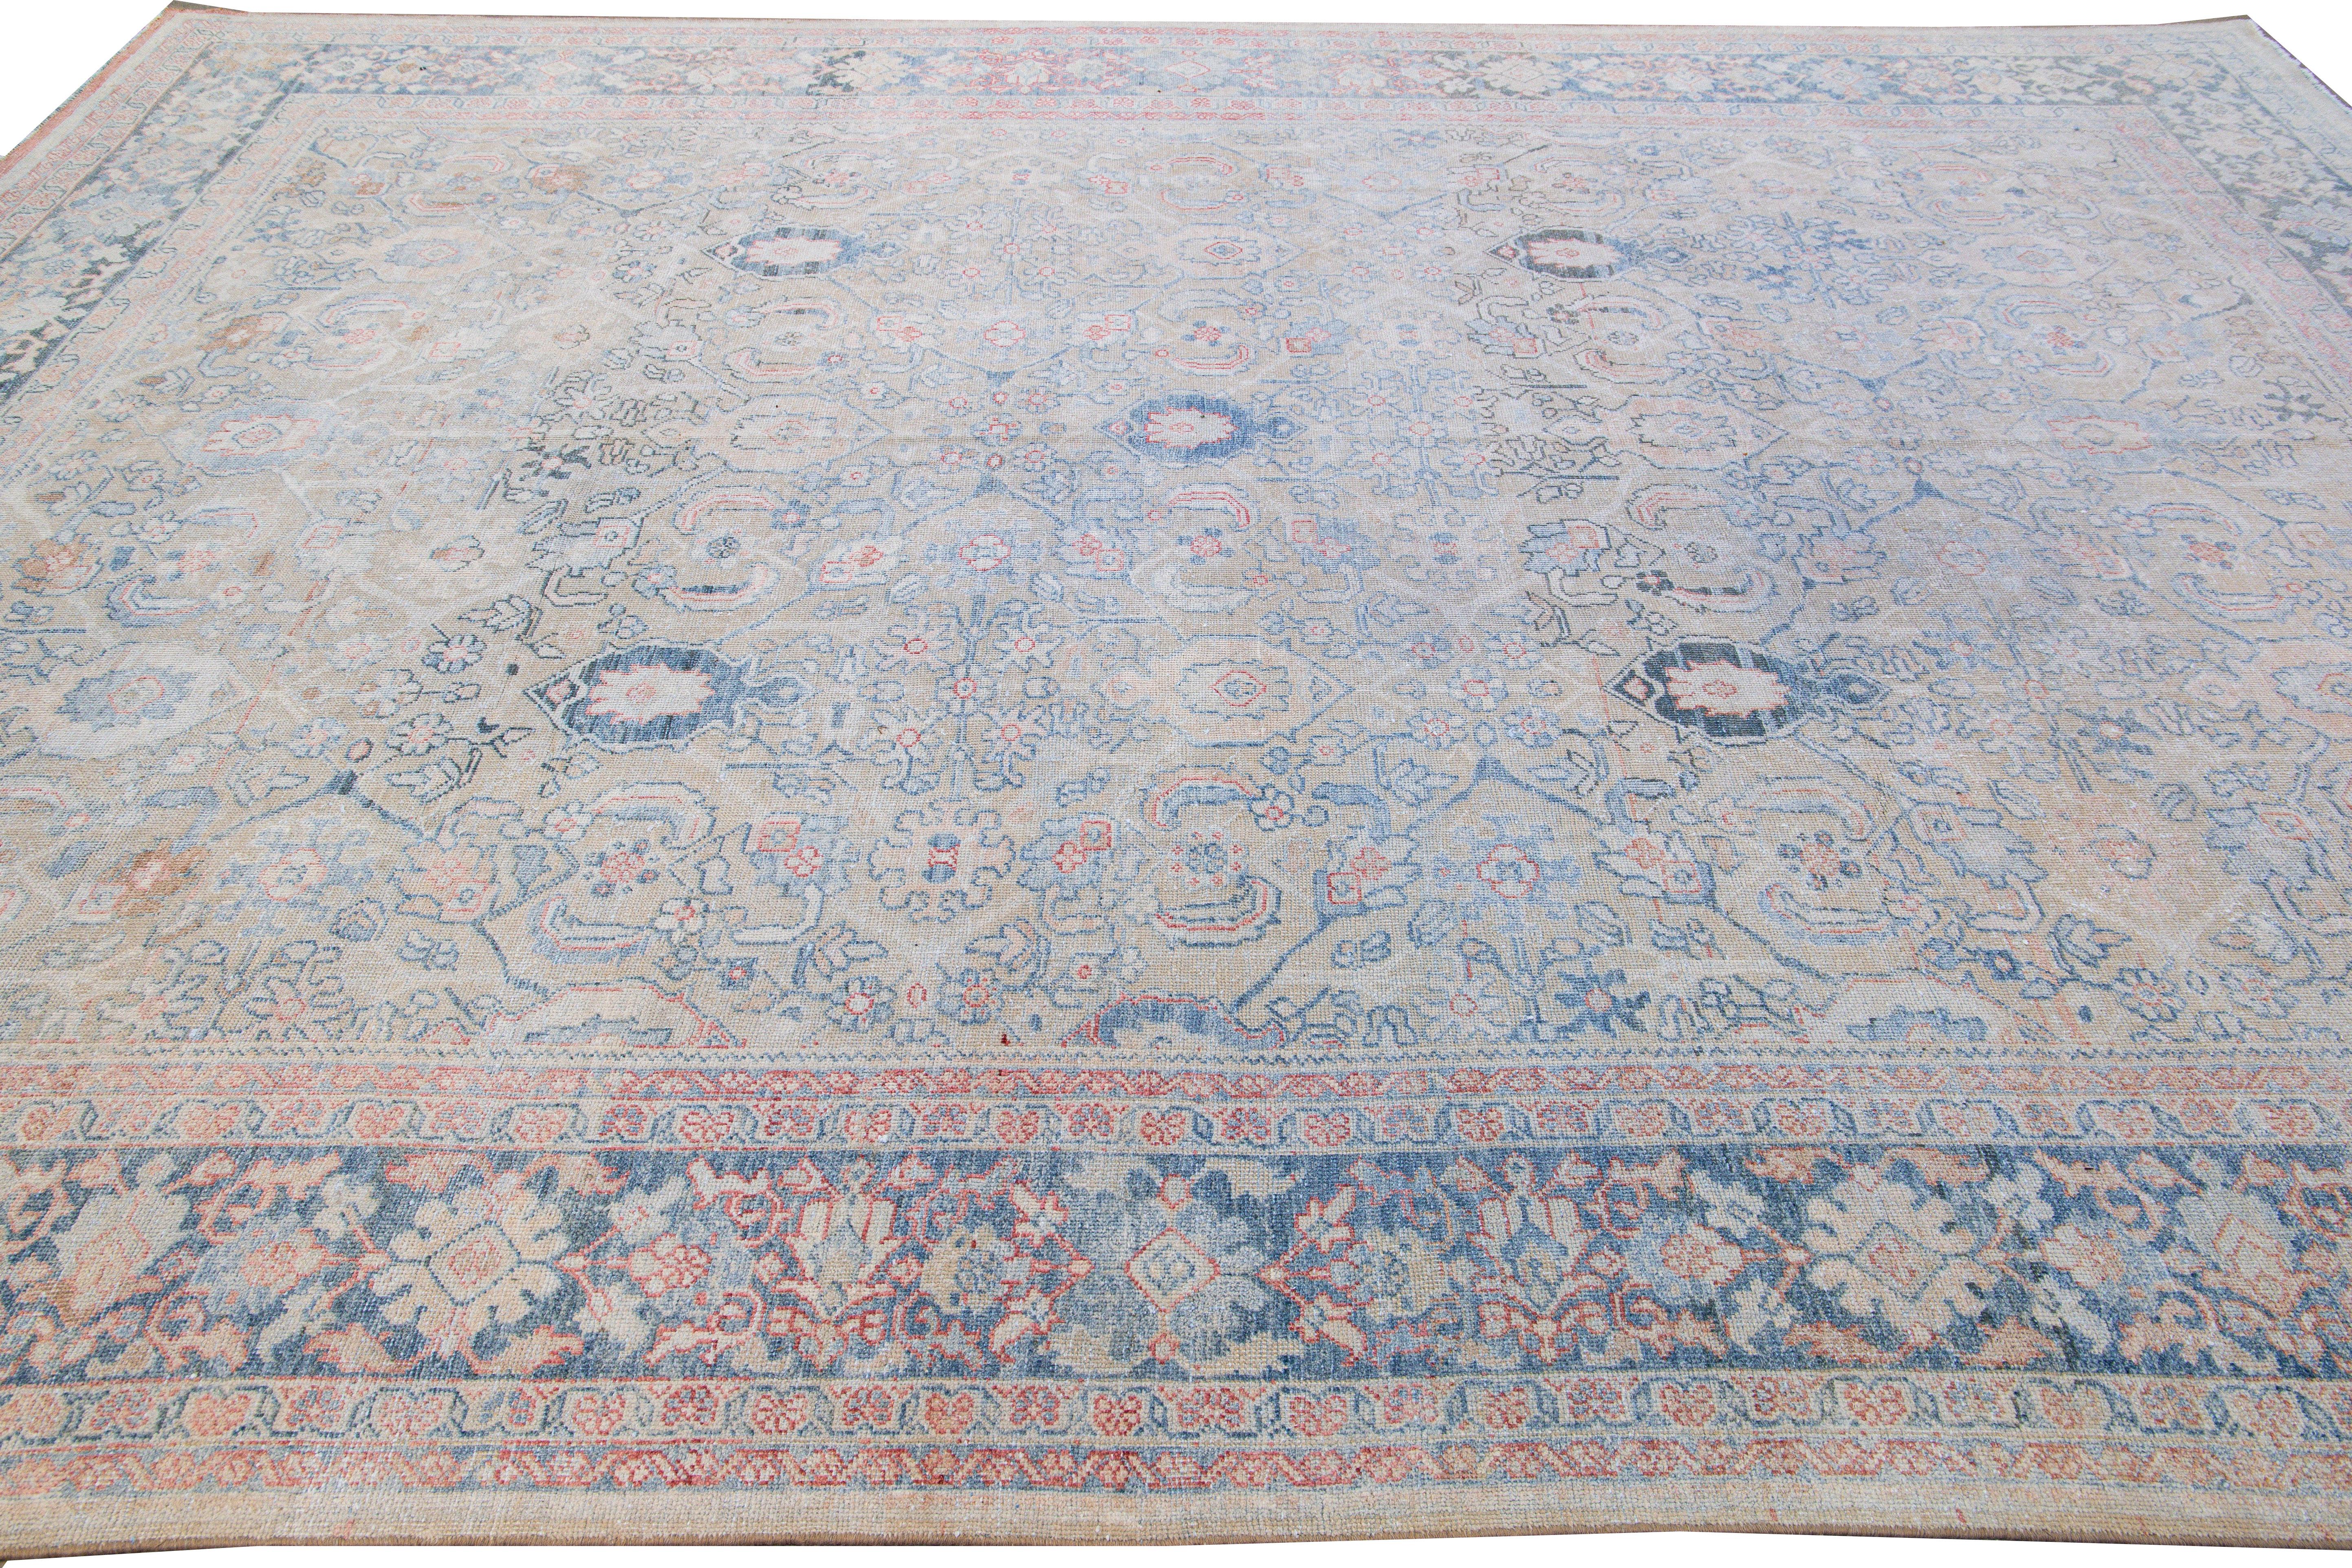 Antique Mahal Handmade Floral Designed Beige Wool Rug In Good Condition For Sale In Norwalk, CT